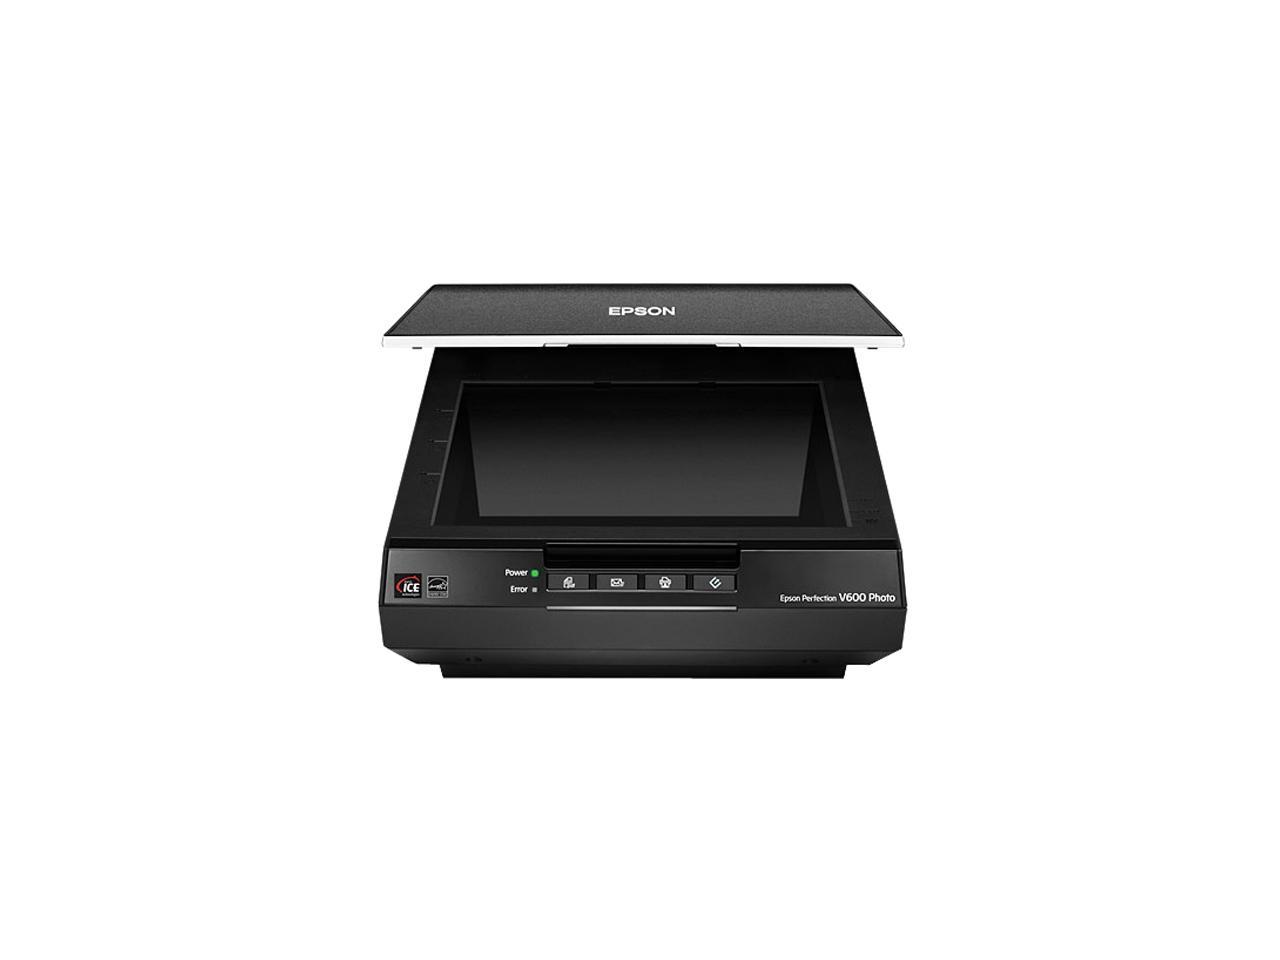 epson perfection v600 software for windows 10